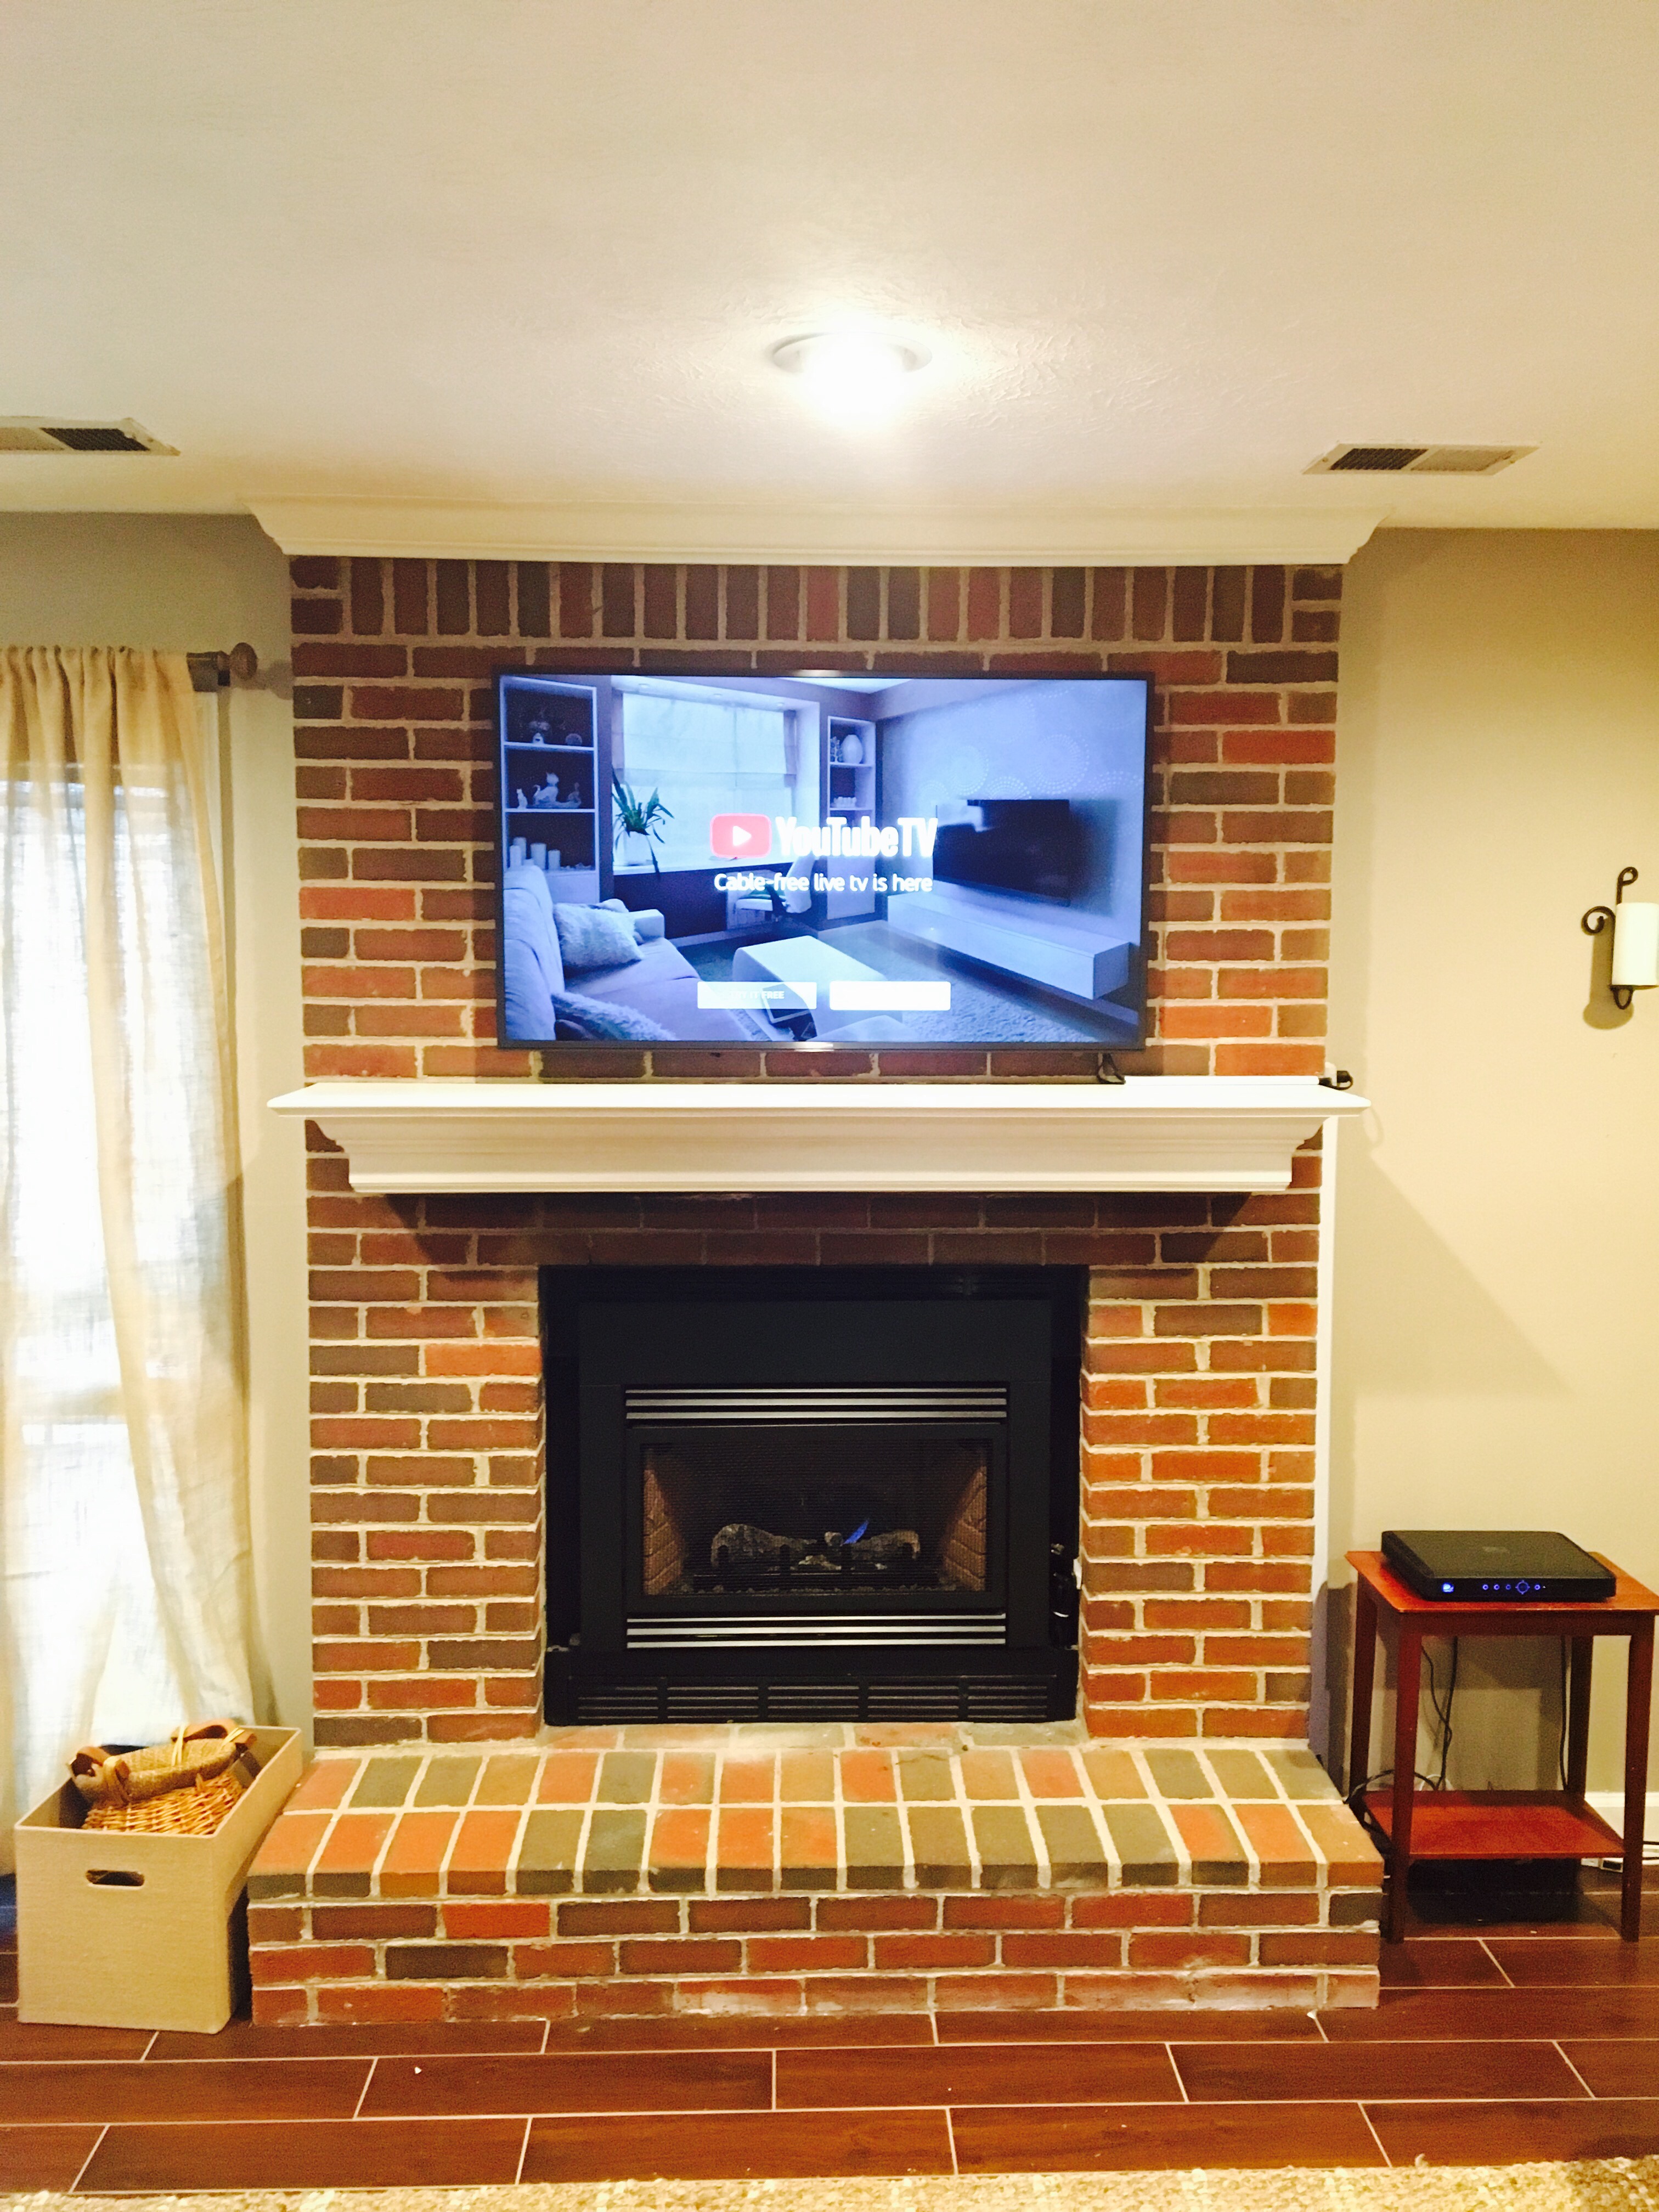 Tv Mounted On A Brick Fireplace In, How To Hang A Tv Over Brick Fireplace